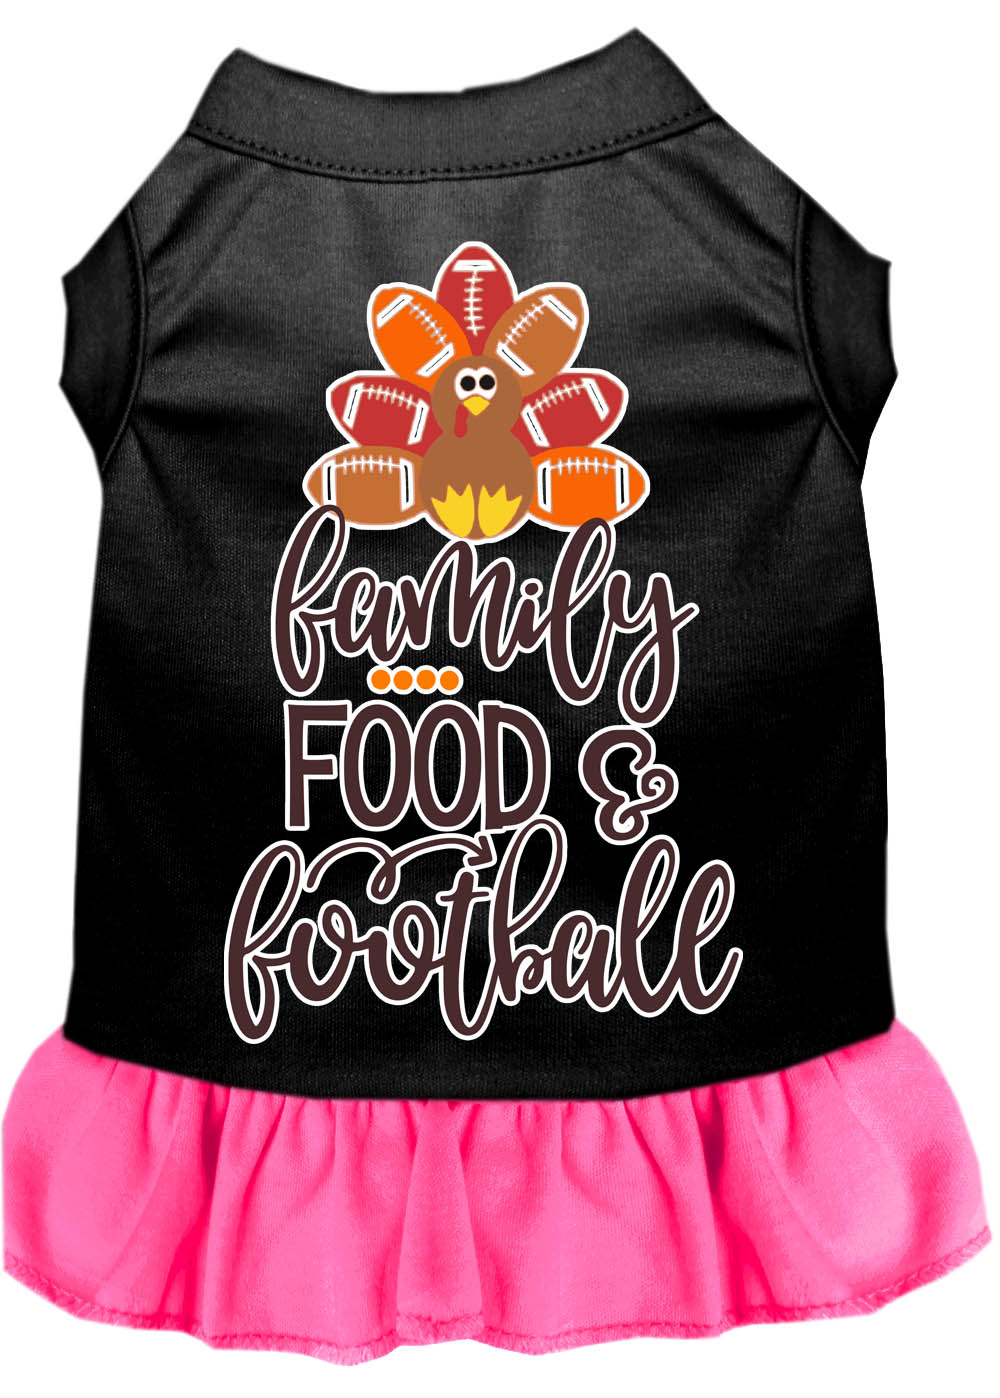 Family, Food, and Football Screen Print Dog Dress Black with Bright Pink XL